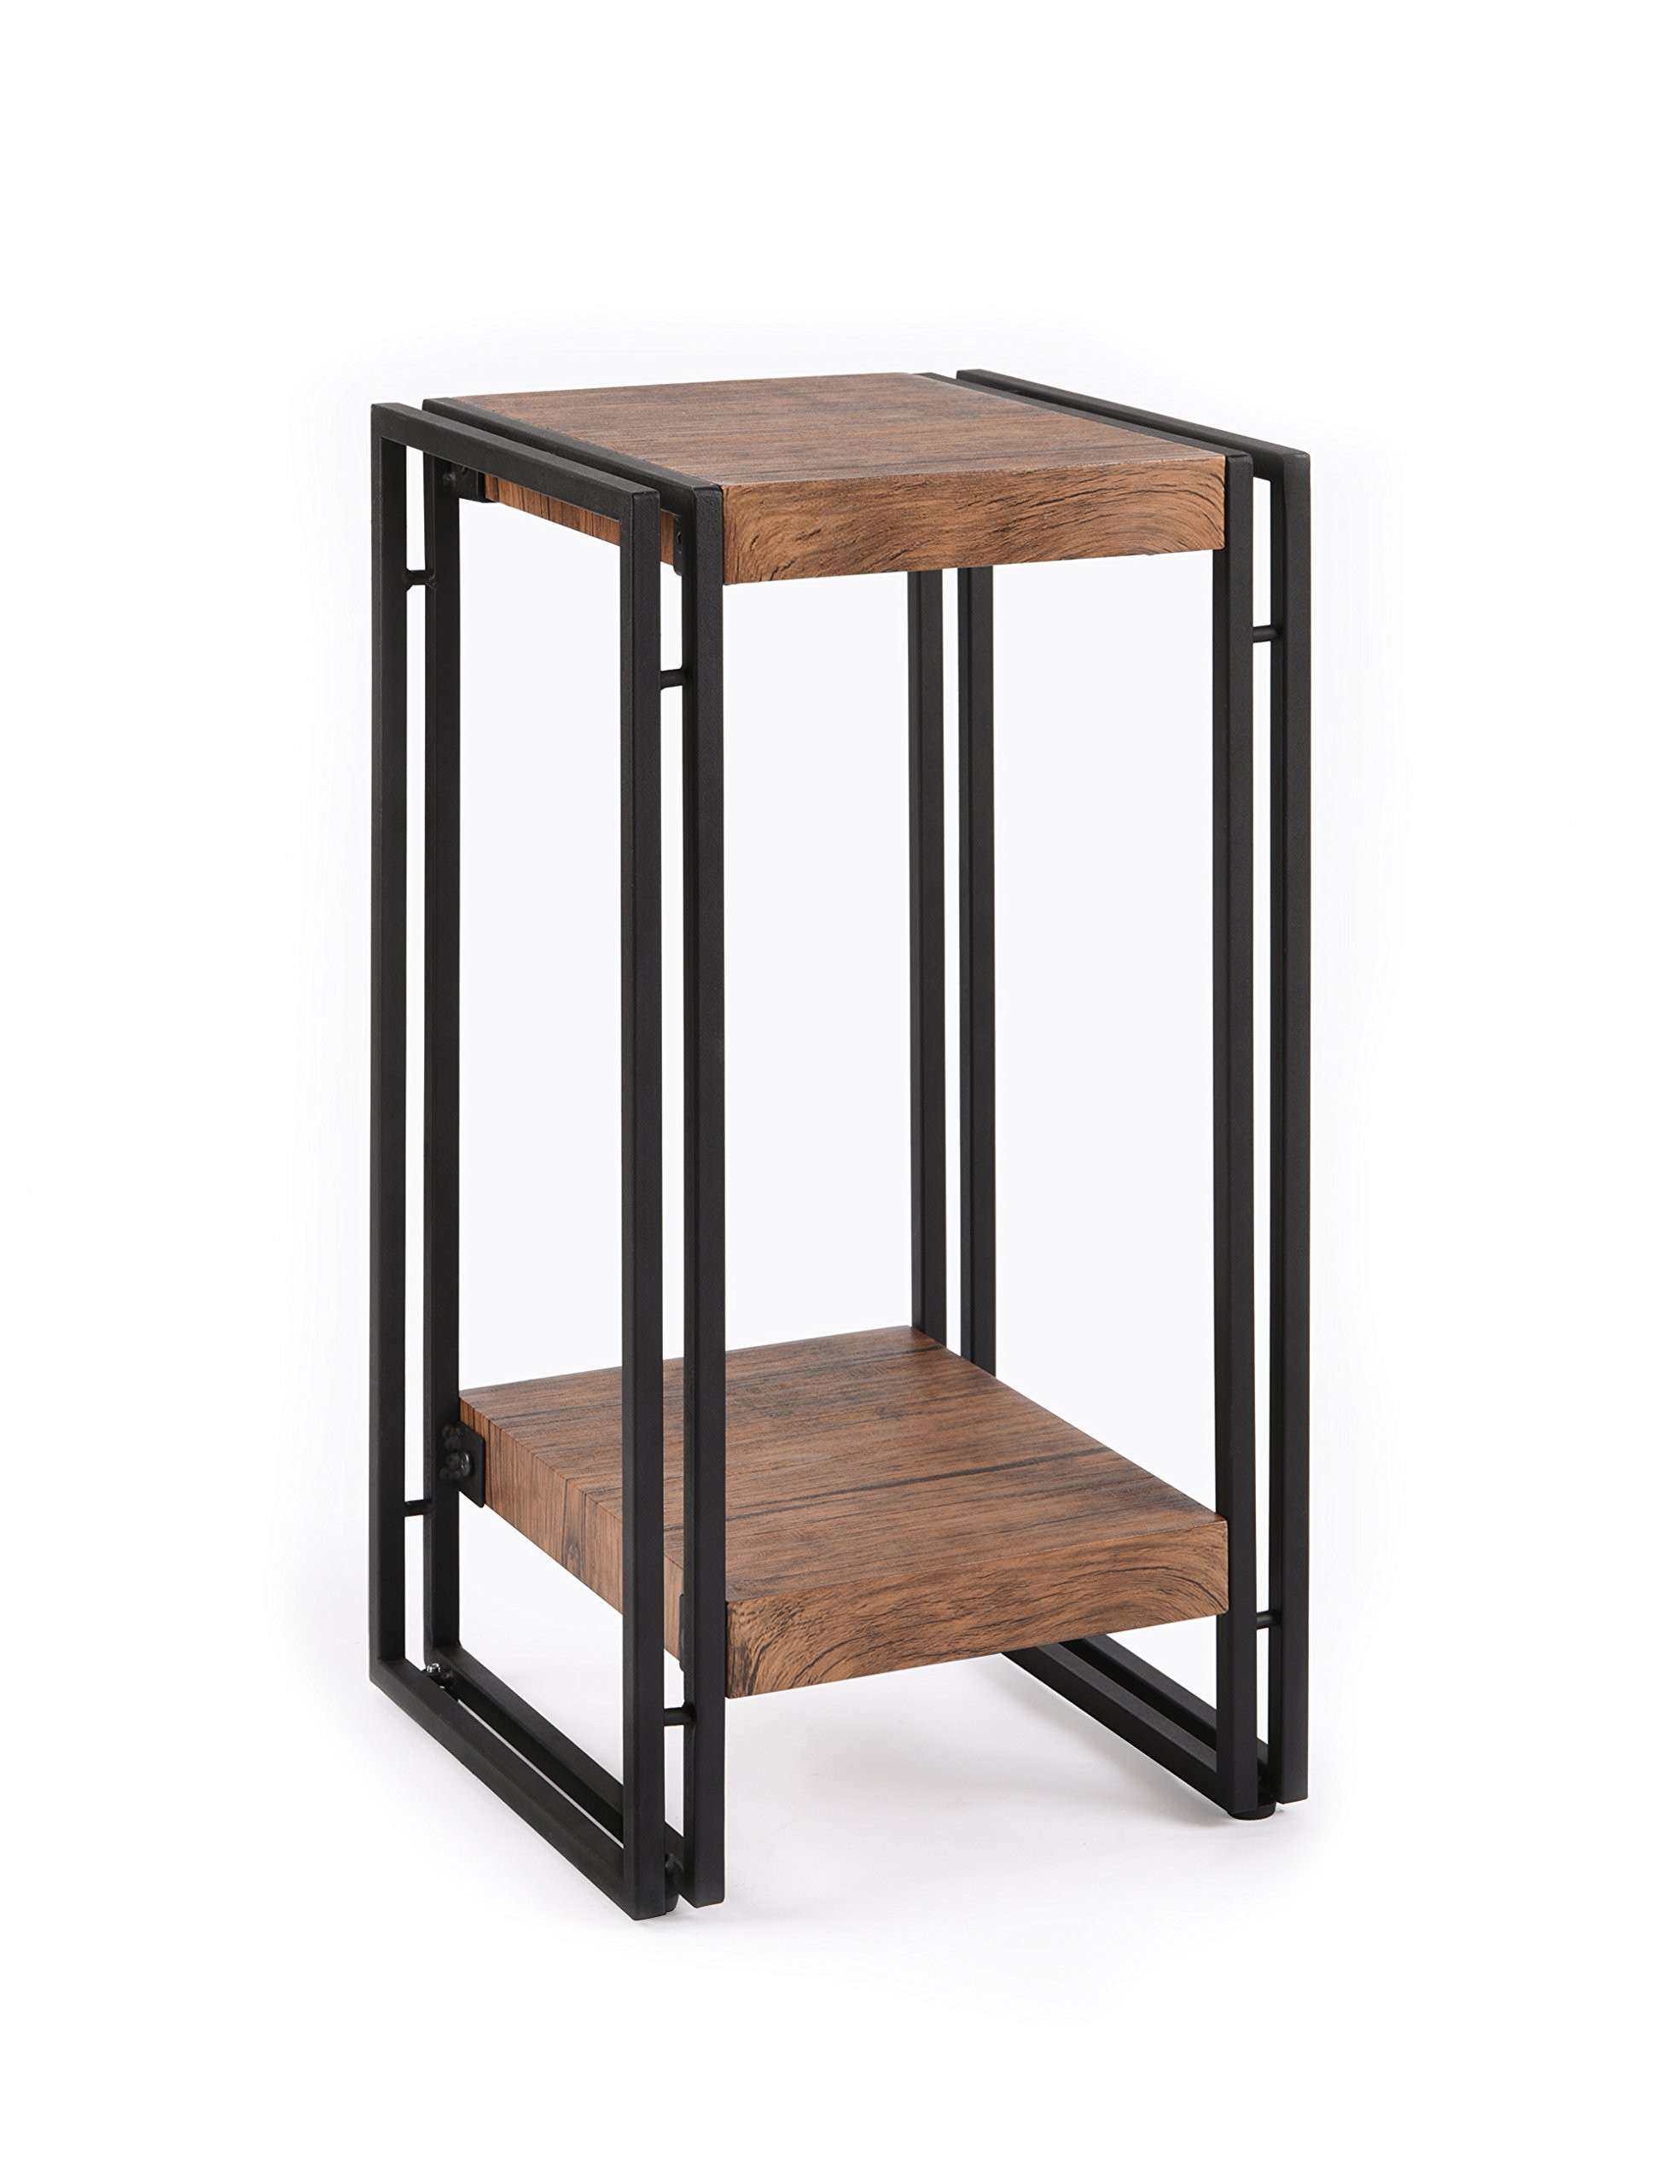 Small Bedroom Side Tables
 FIVEGIVEN Accent Side Table for Small Spaces End Table for